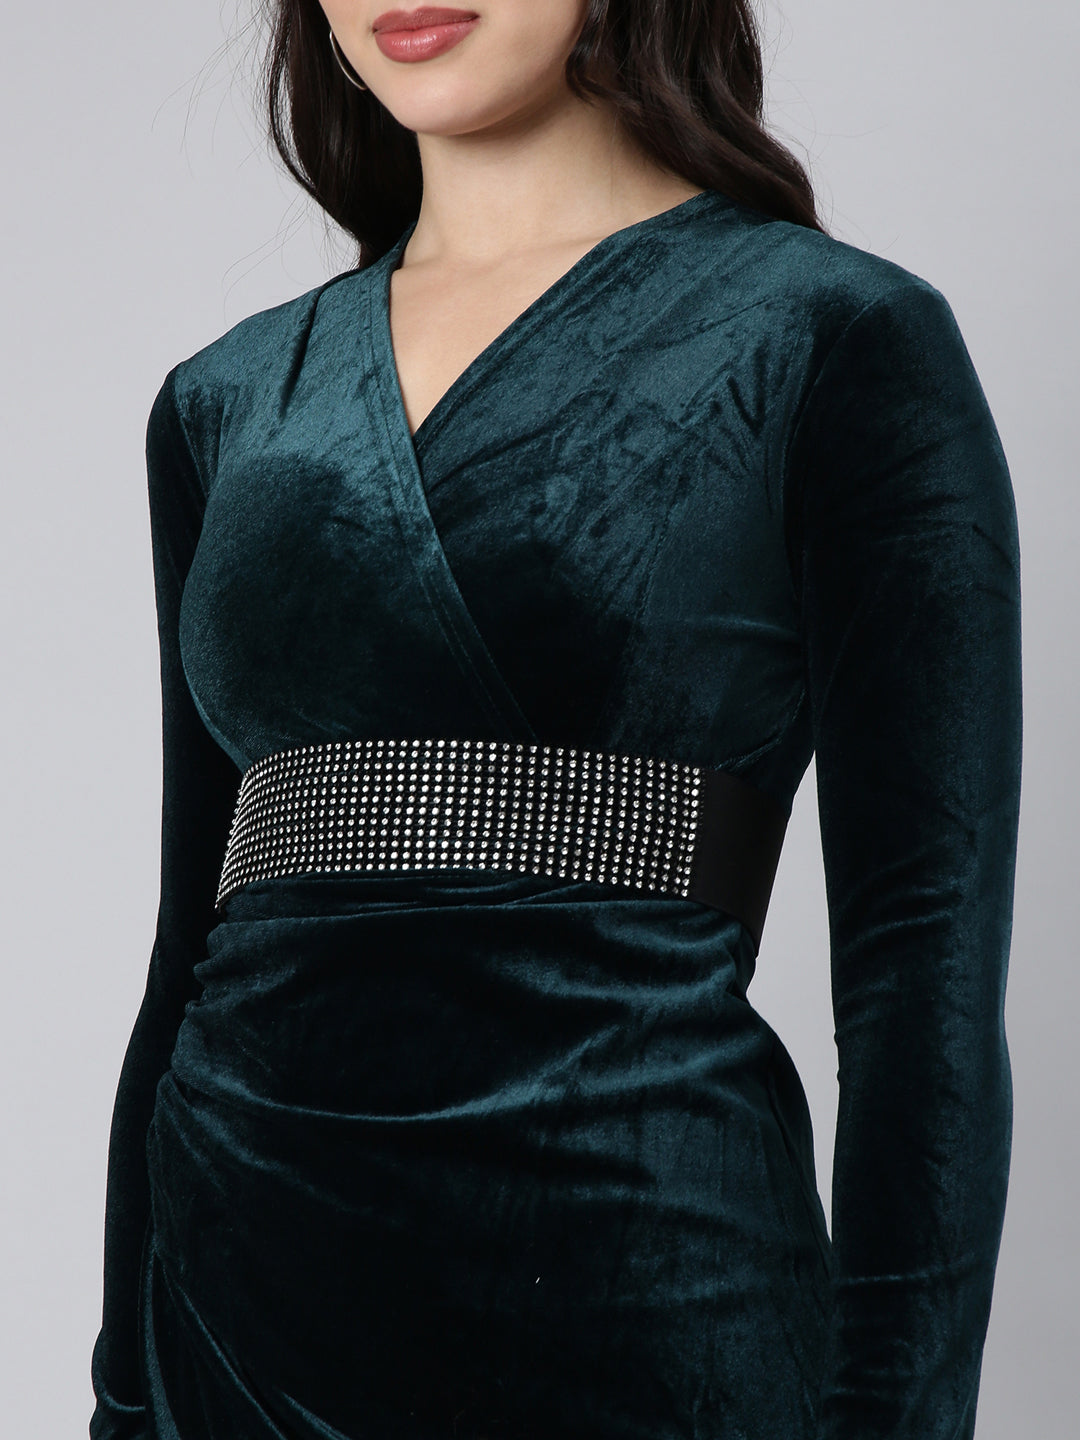 Women Solid Green Sheath Dress comes with Belt